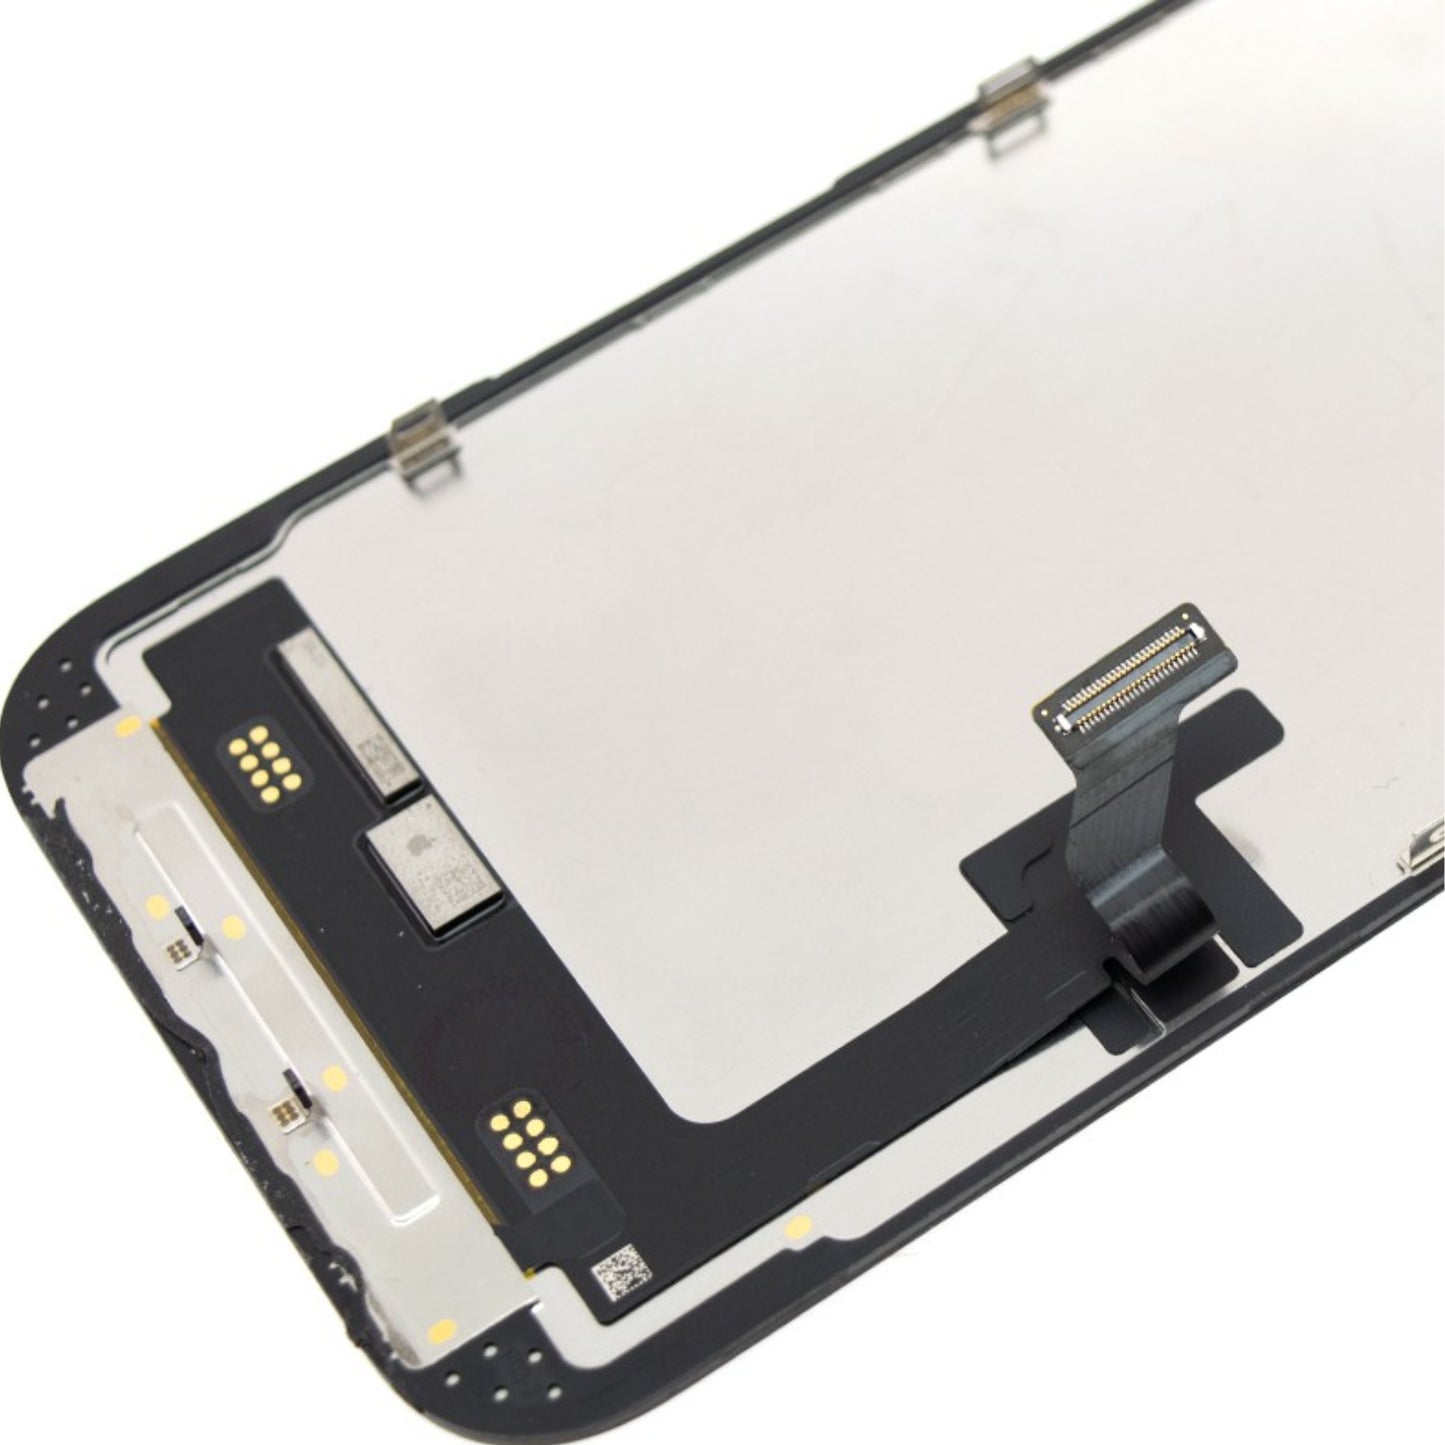 REFURB OLED Assembly for iPhone 15 Screen Replacement